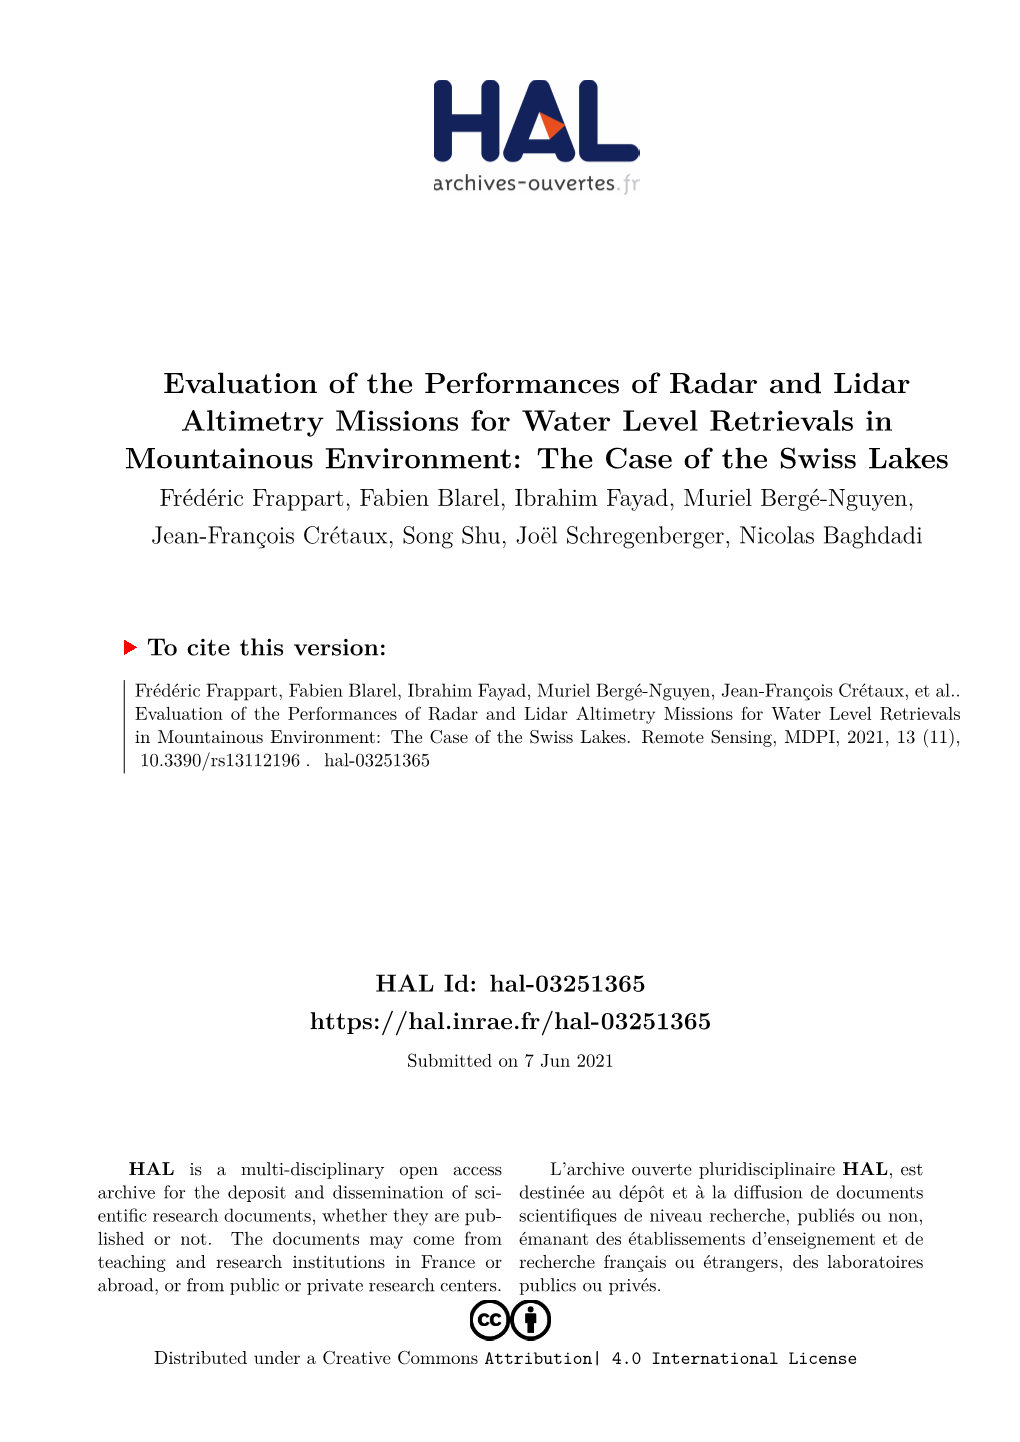 Evaluation of the Performances of Radar and Lidar Altimetry Missions